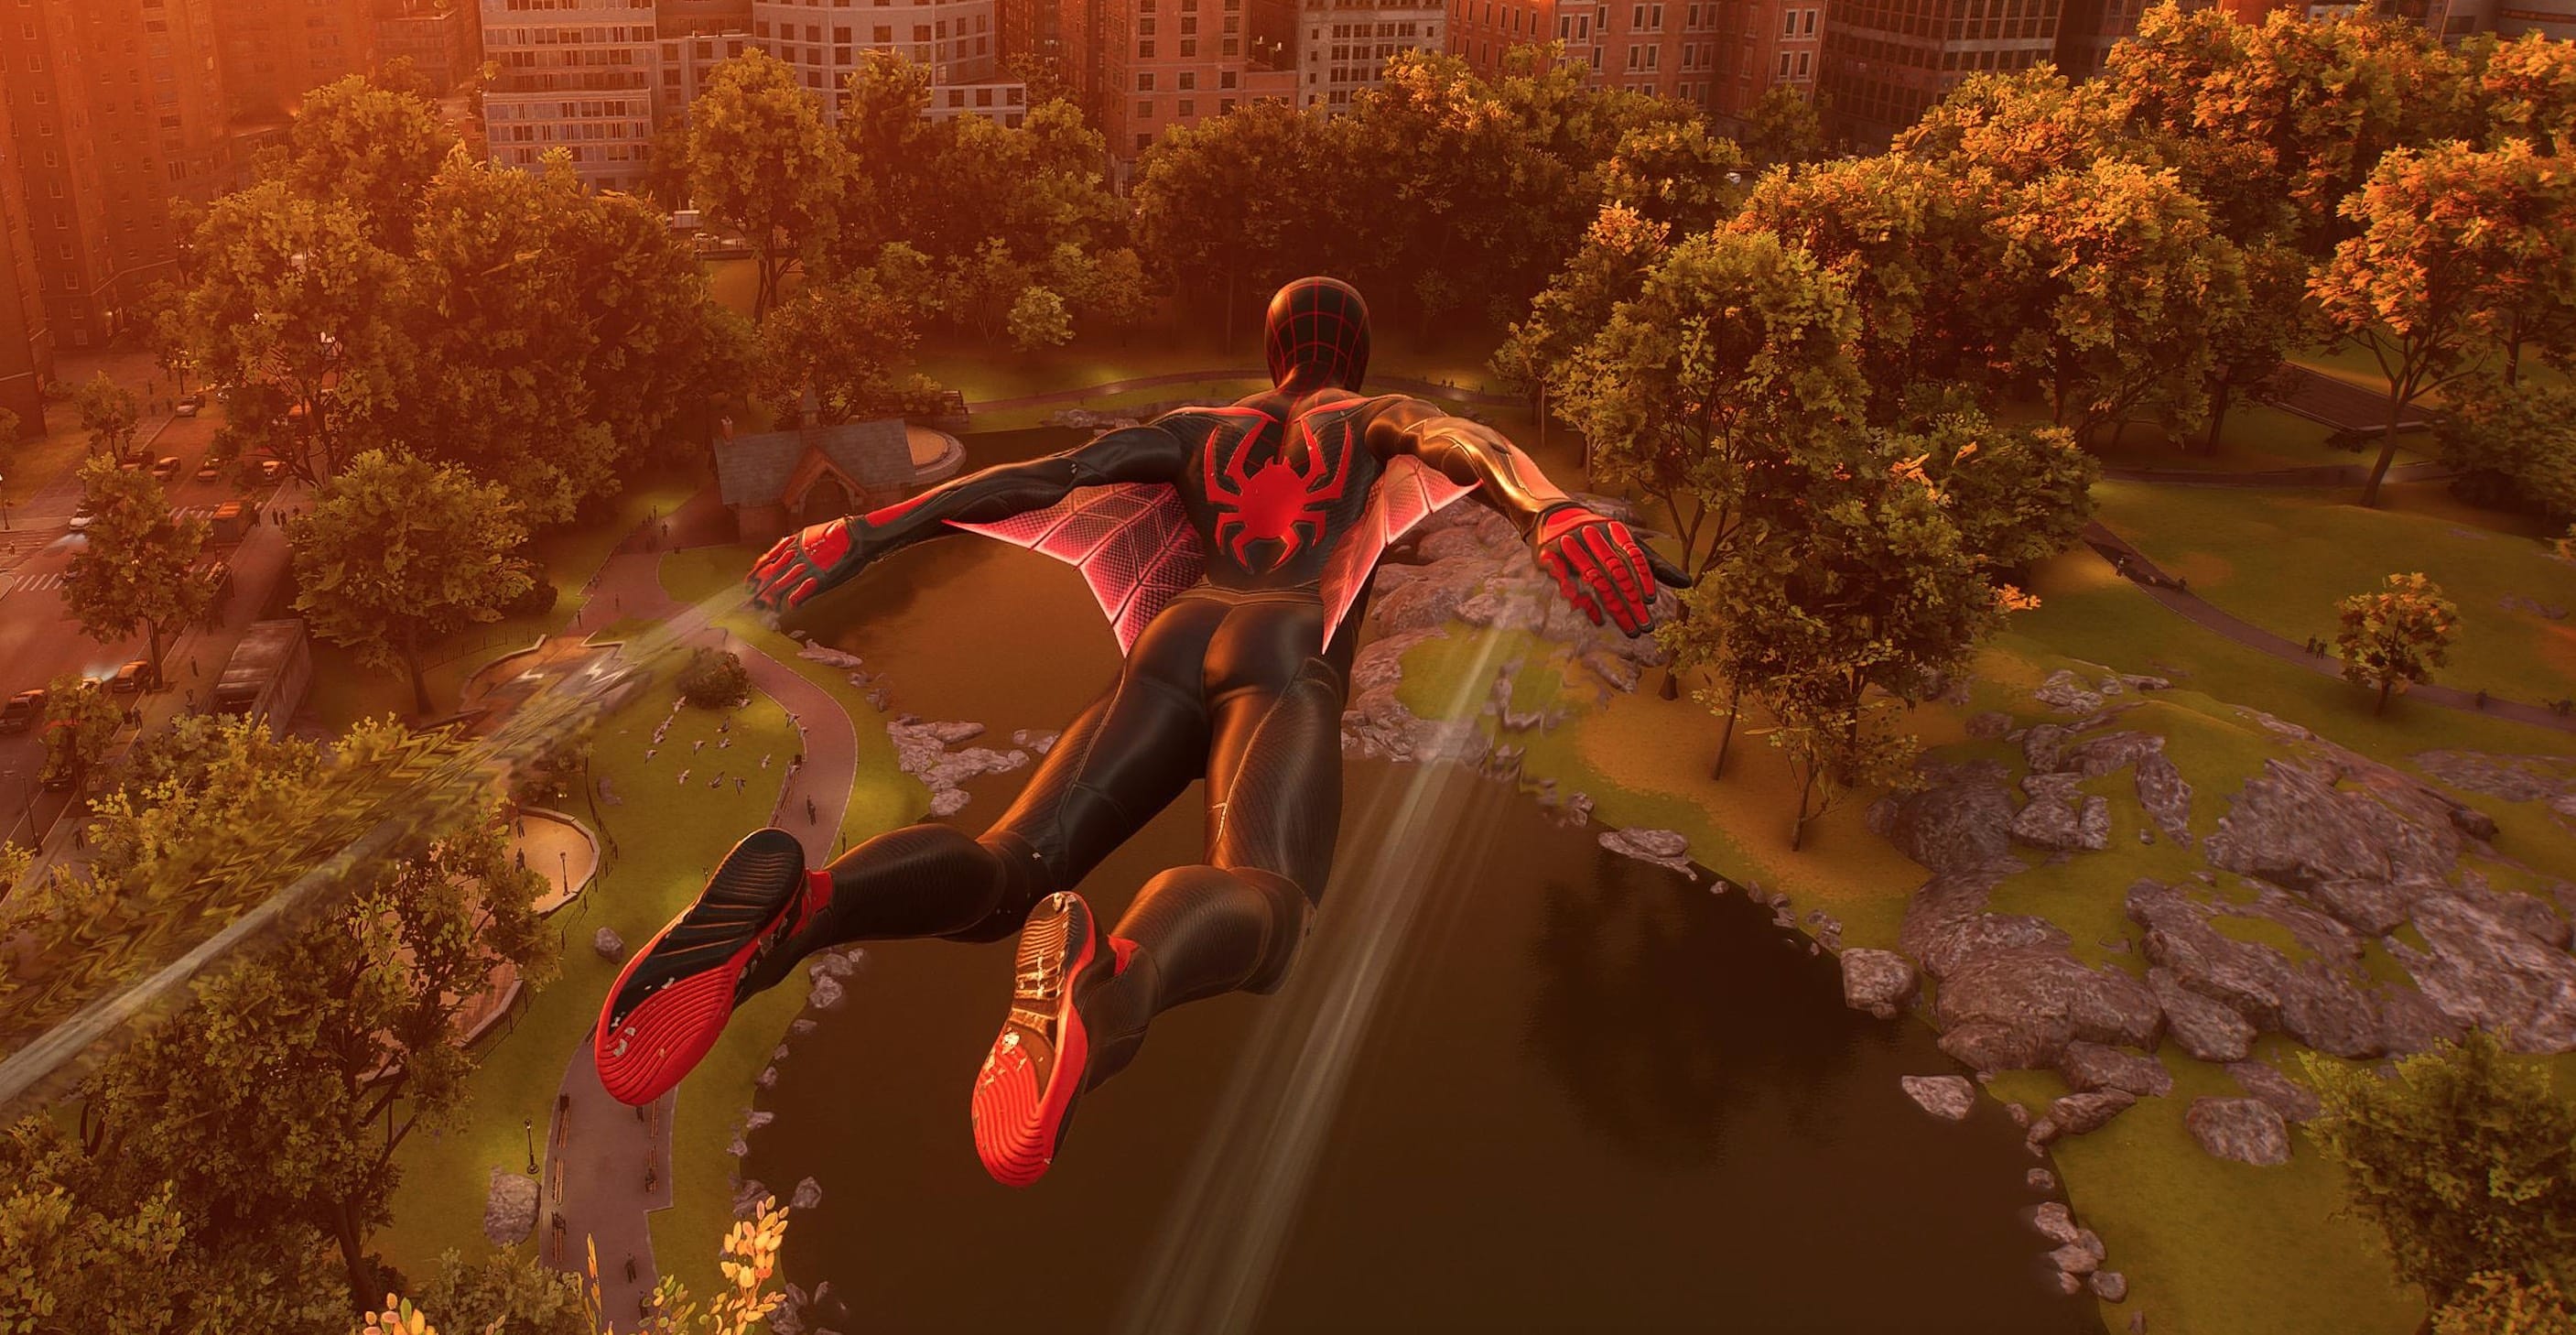 Marvel's Spider-Man 2 first review appears online early